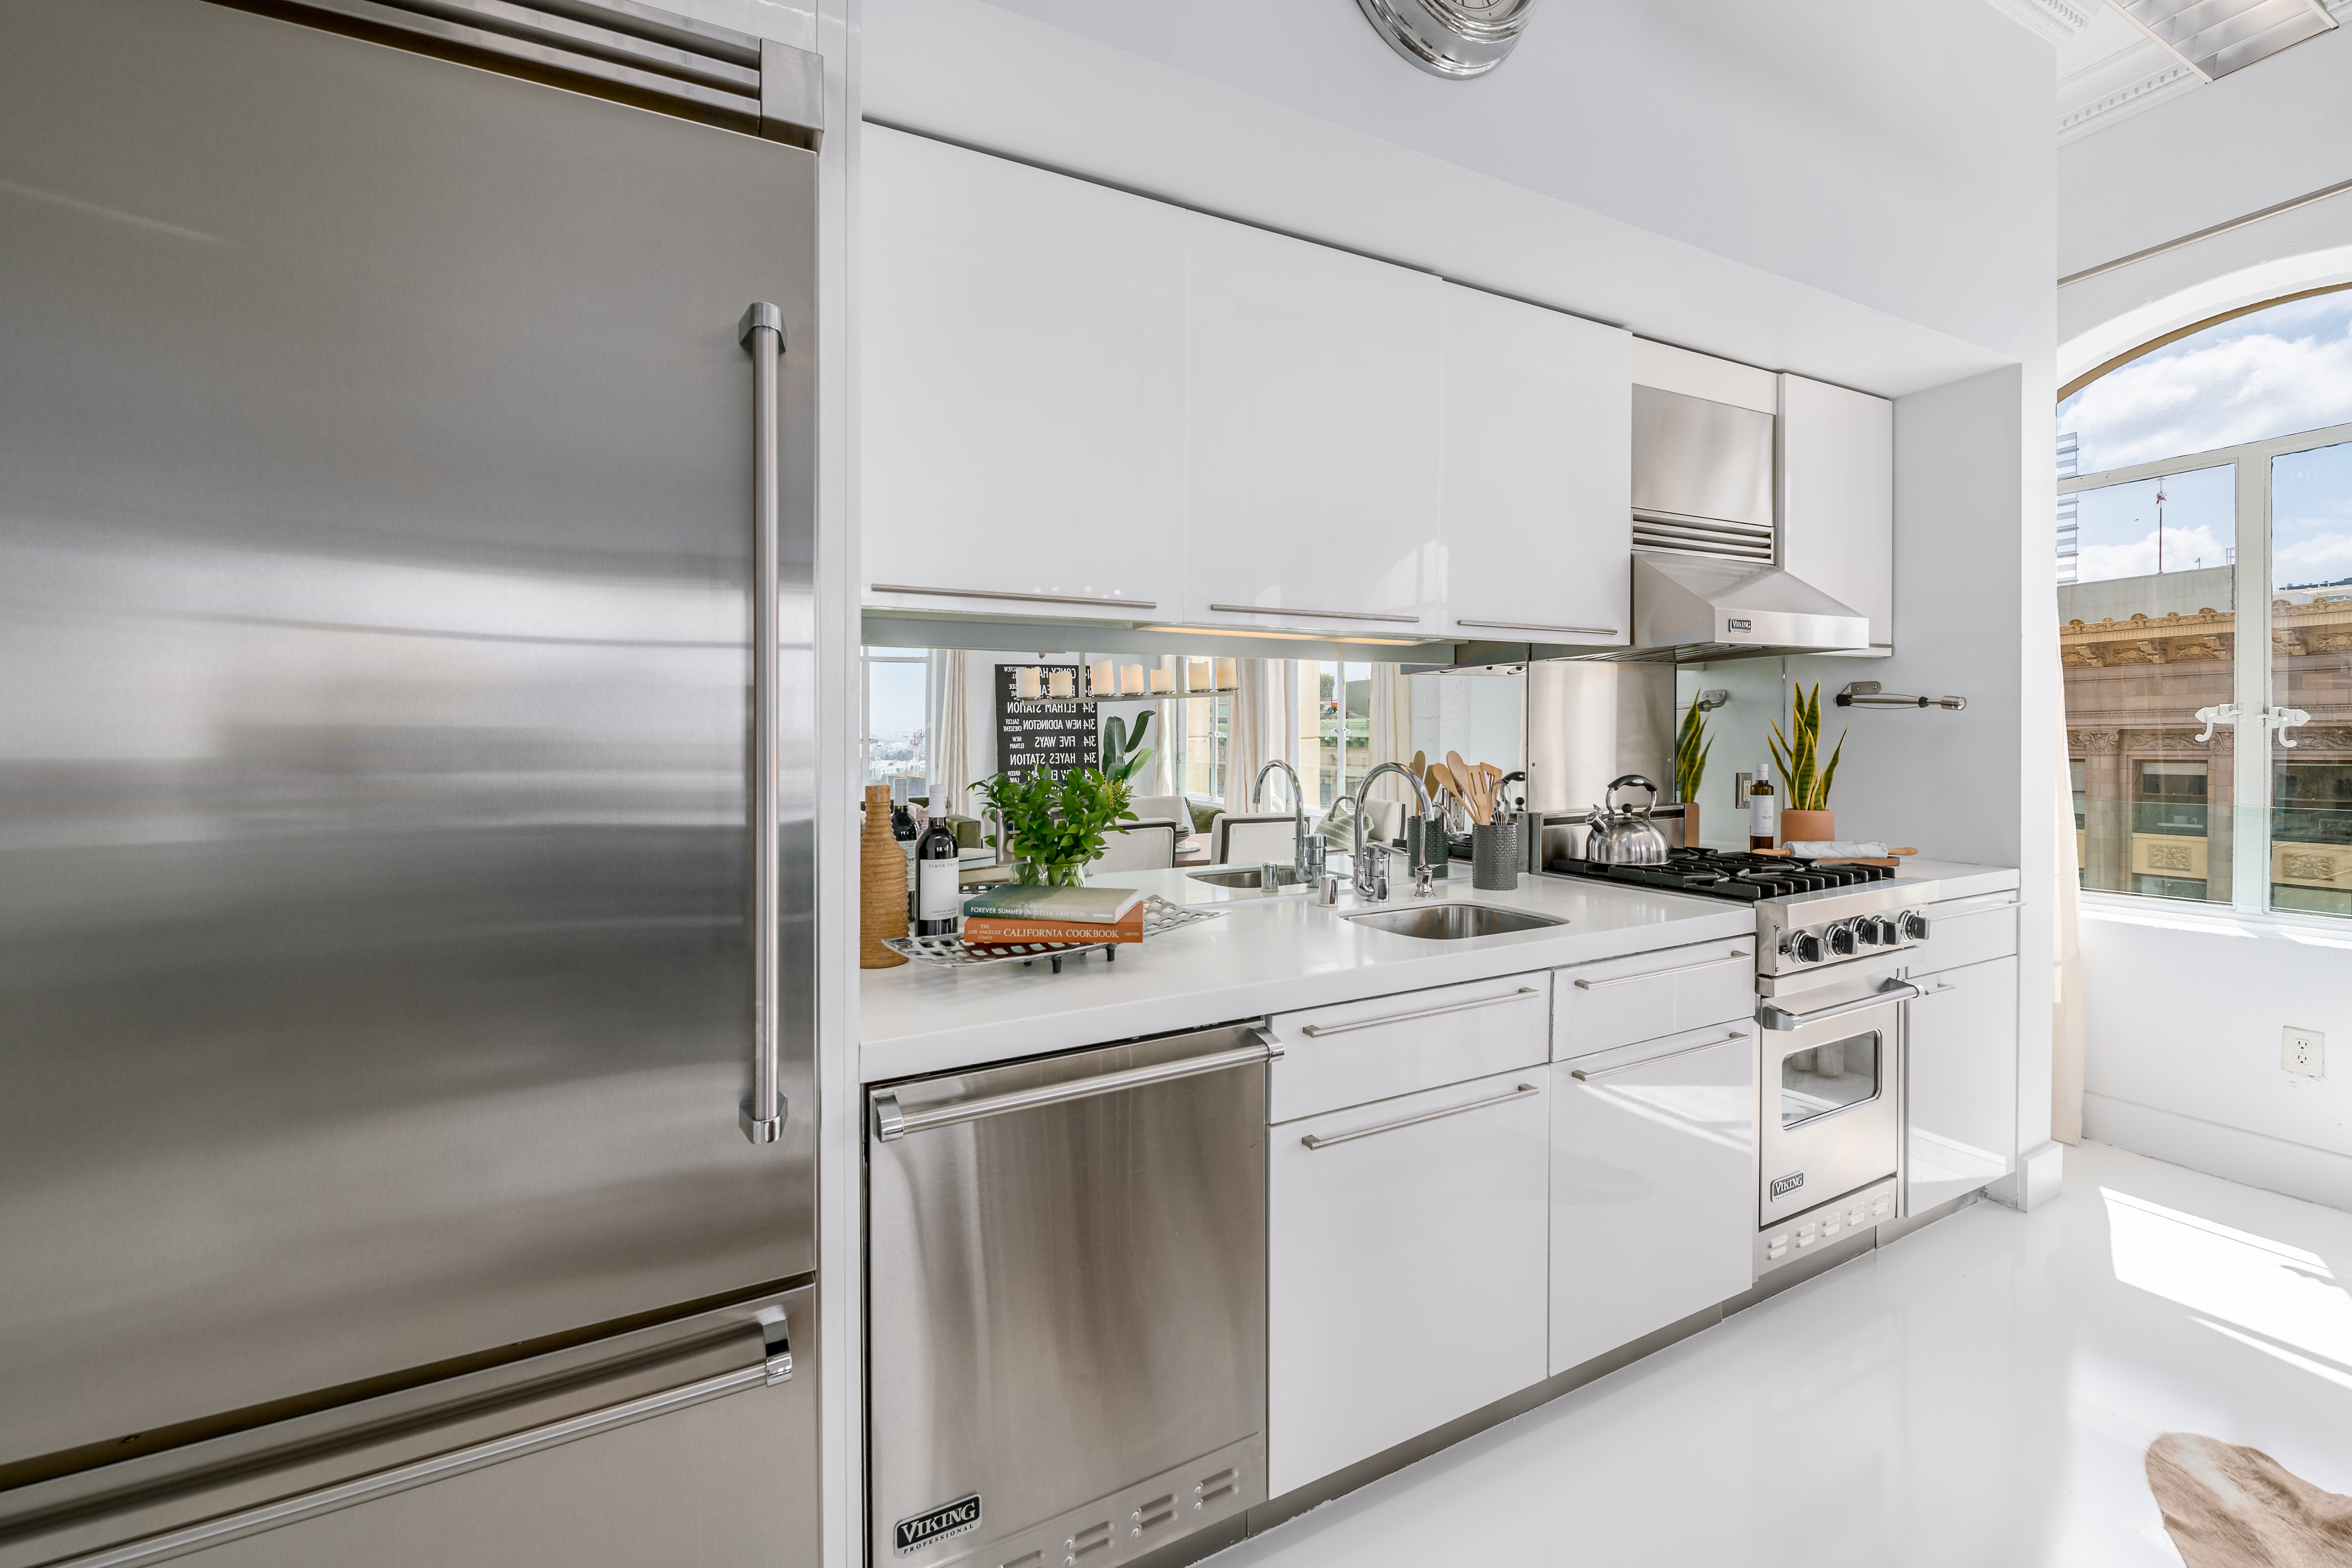 Stunning chef's kitchen with white walls and cabinetry, plus stainless steel appliances.